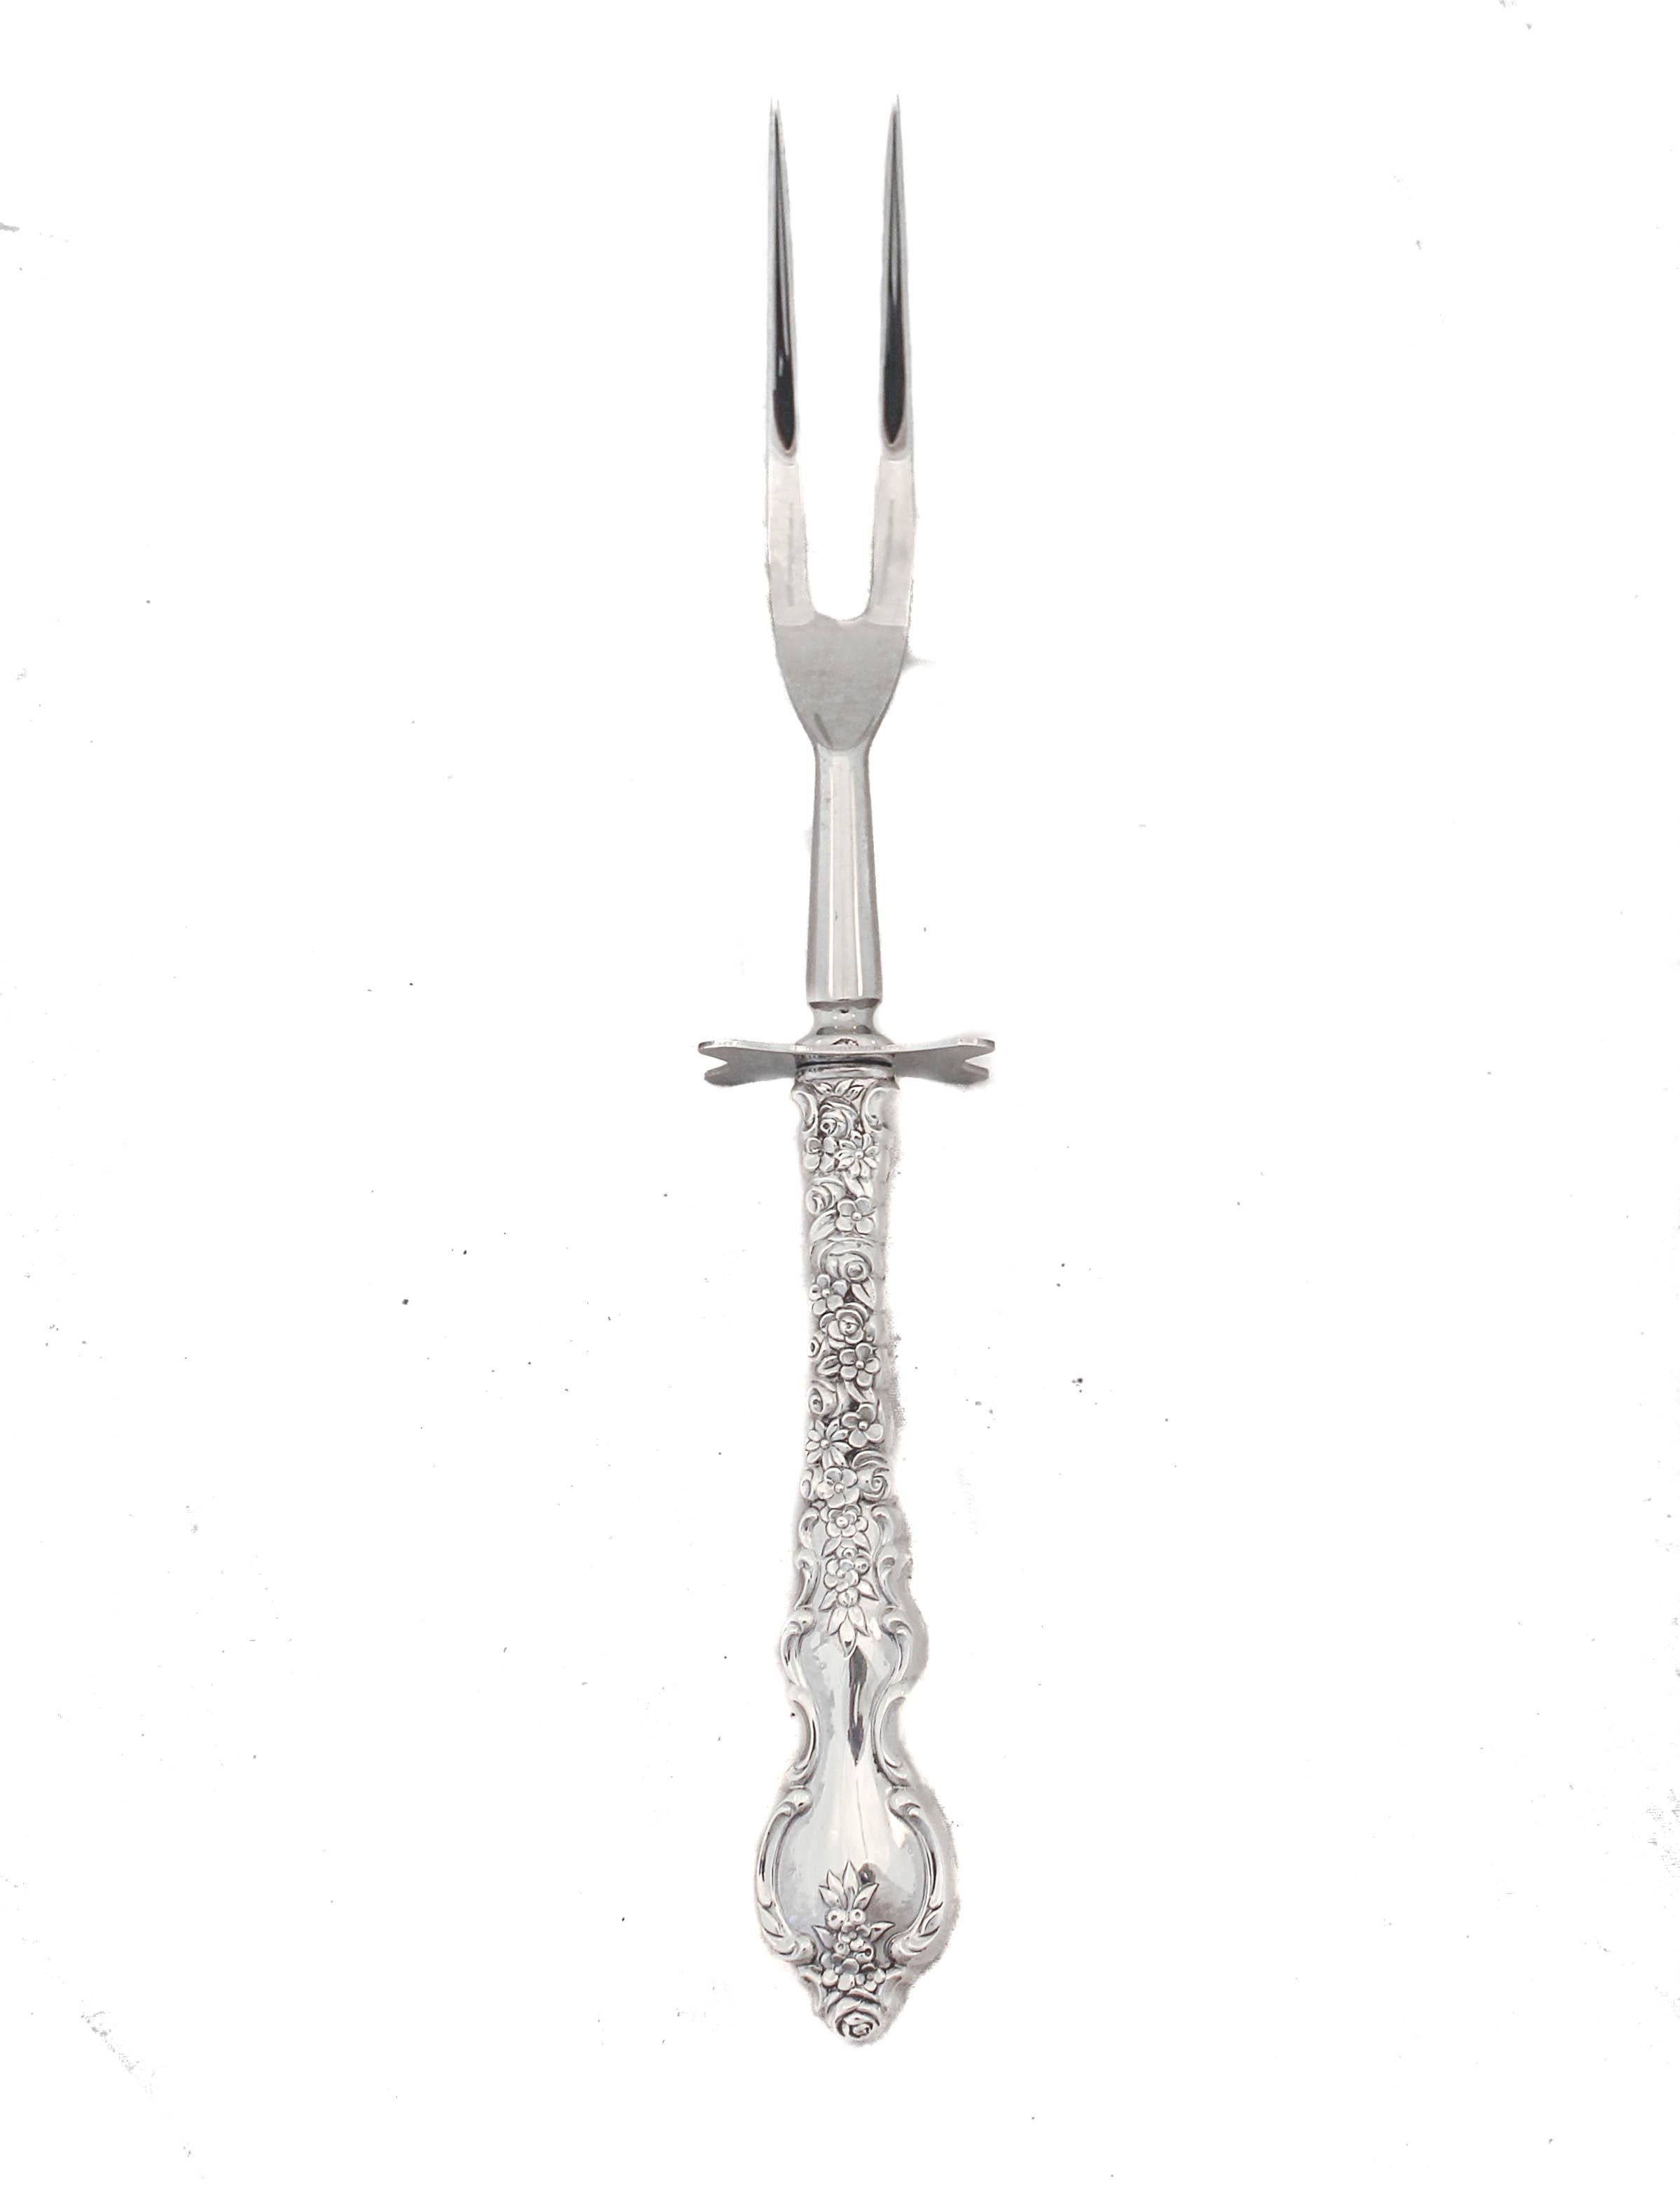 We are delighted to offer you this sterling silver Art Nouveau carving fork and knife in the Lily pattern by Frank Whiting. The handles of both serving pieces have that classic Art Nouveau floral motif.
Just in time for the holiday season, this